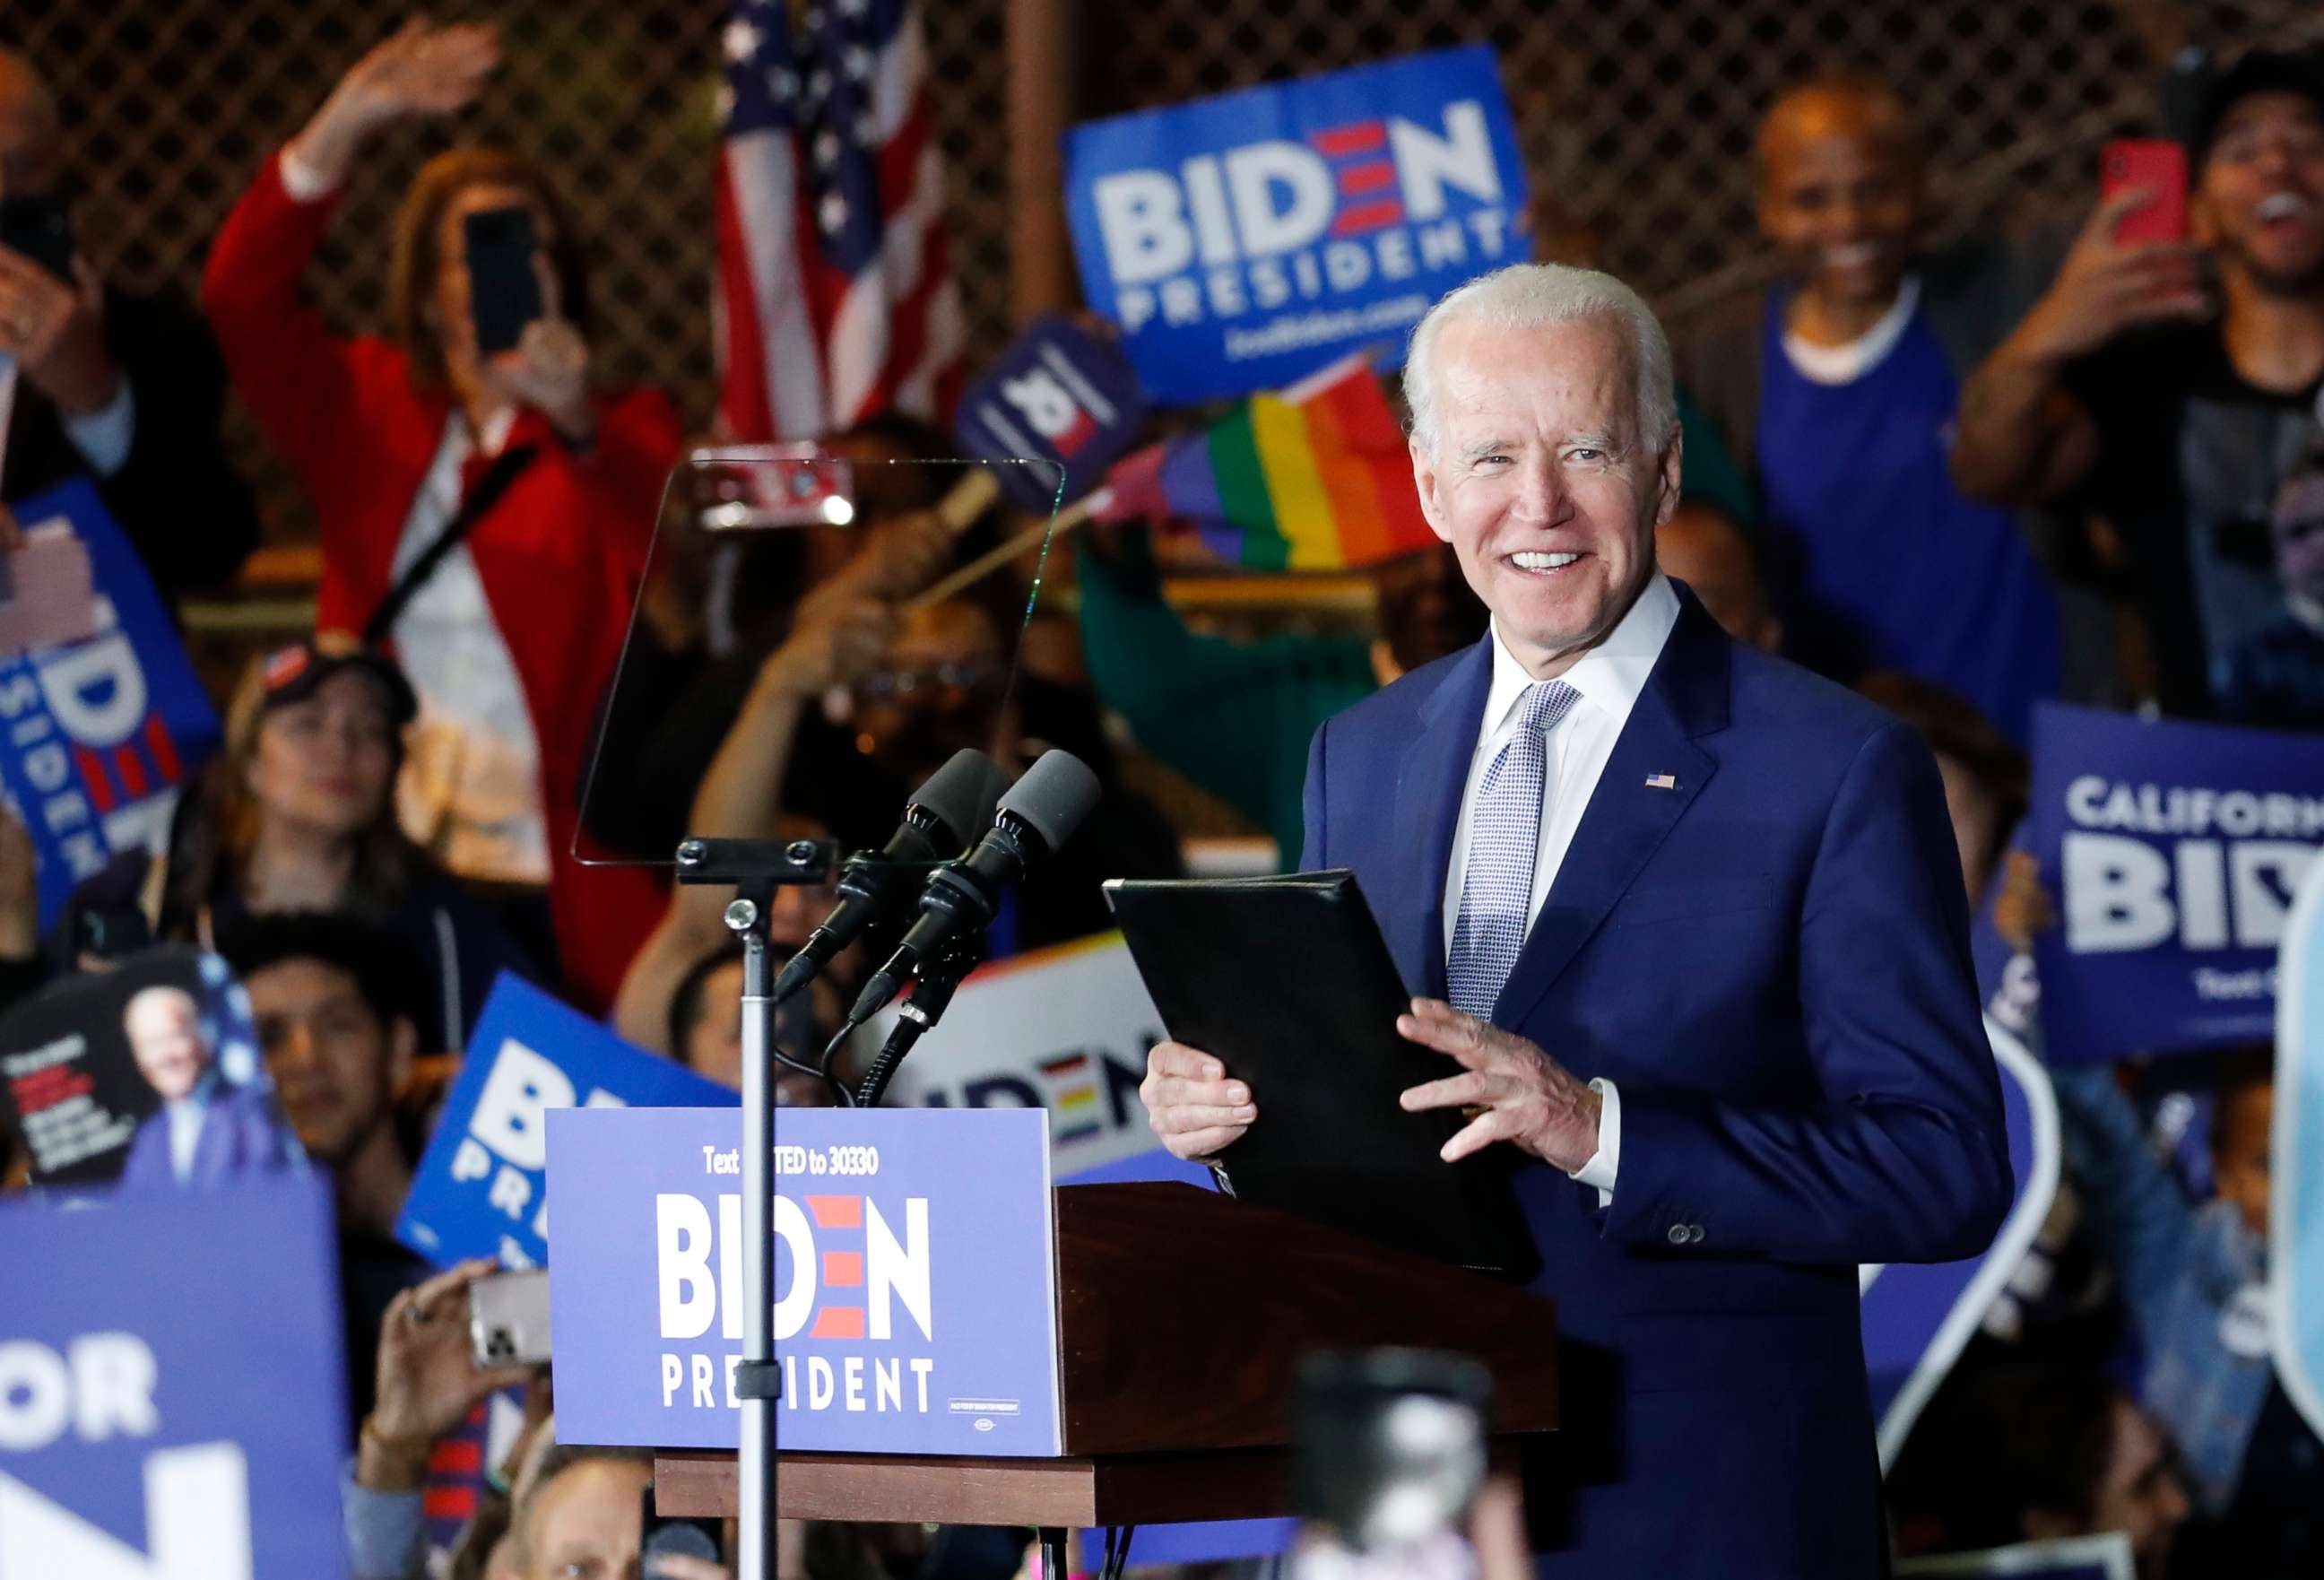 PHOTO: Democratic presidential candidate and former Vice President Joe Biden appears at his Super Tuesday night rally in Los Angeles, March 3, 2020.